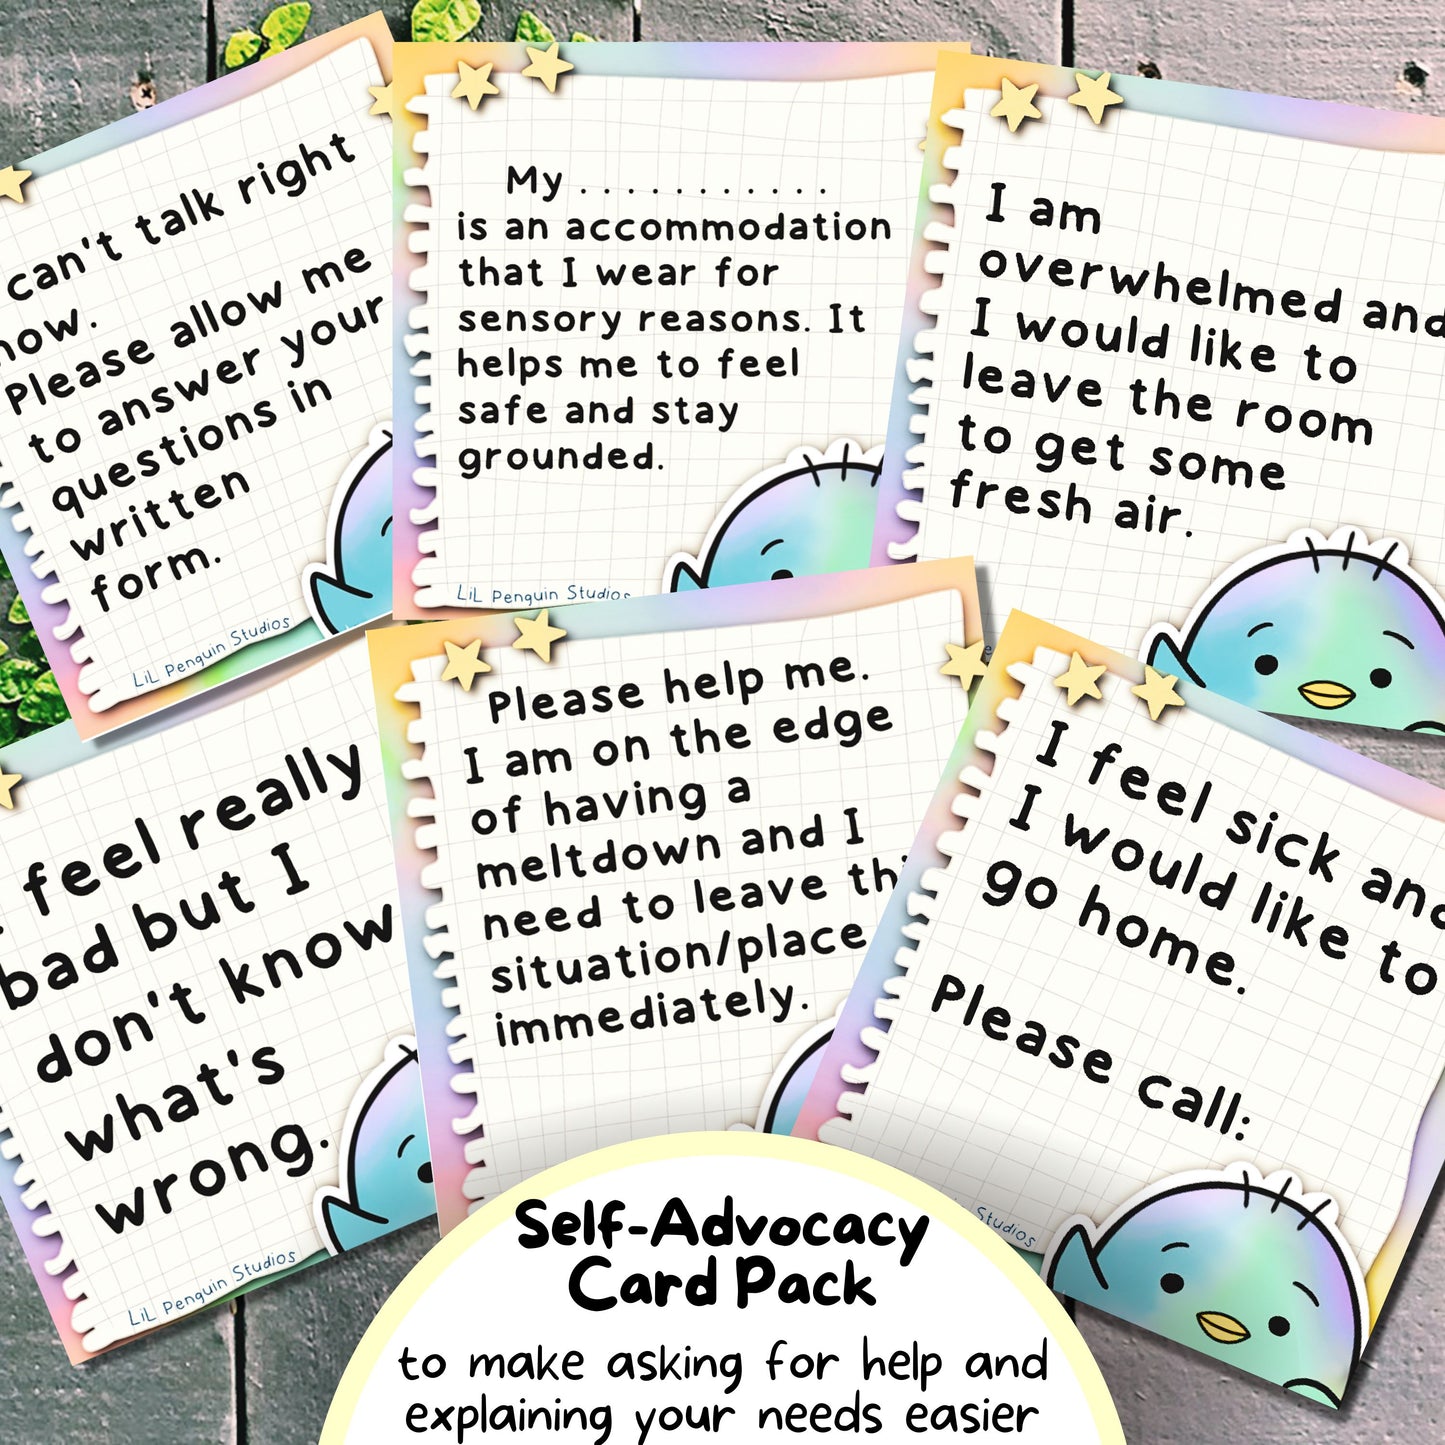 Communication Cards with Explanations to make asking for help and explaining your needs easier - Autism Self-Advocacy Card Pack (School, Work, Friends, Family) written and hand-drawn by an autistic artist (LiL Penguin Studios( 